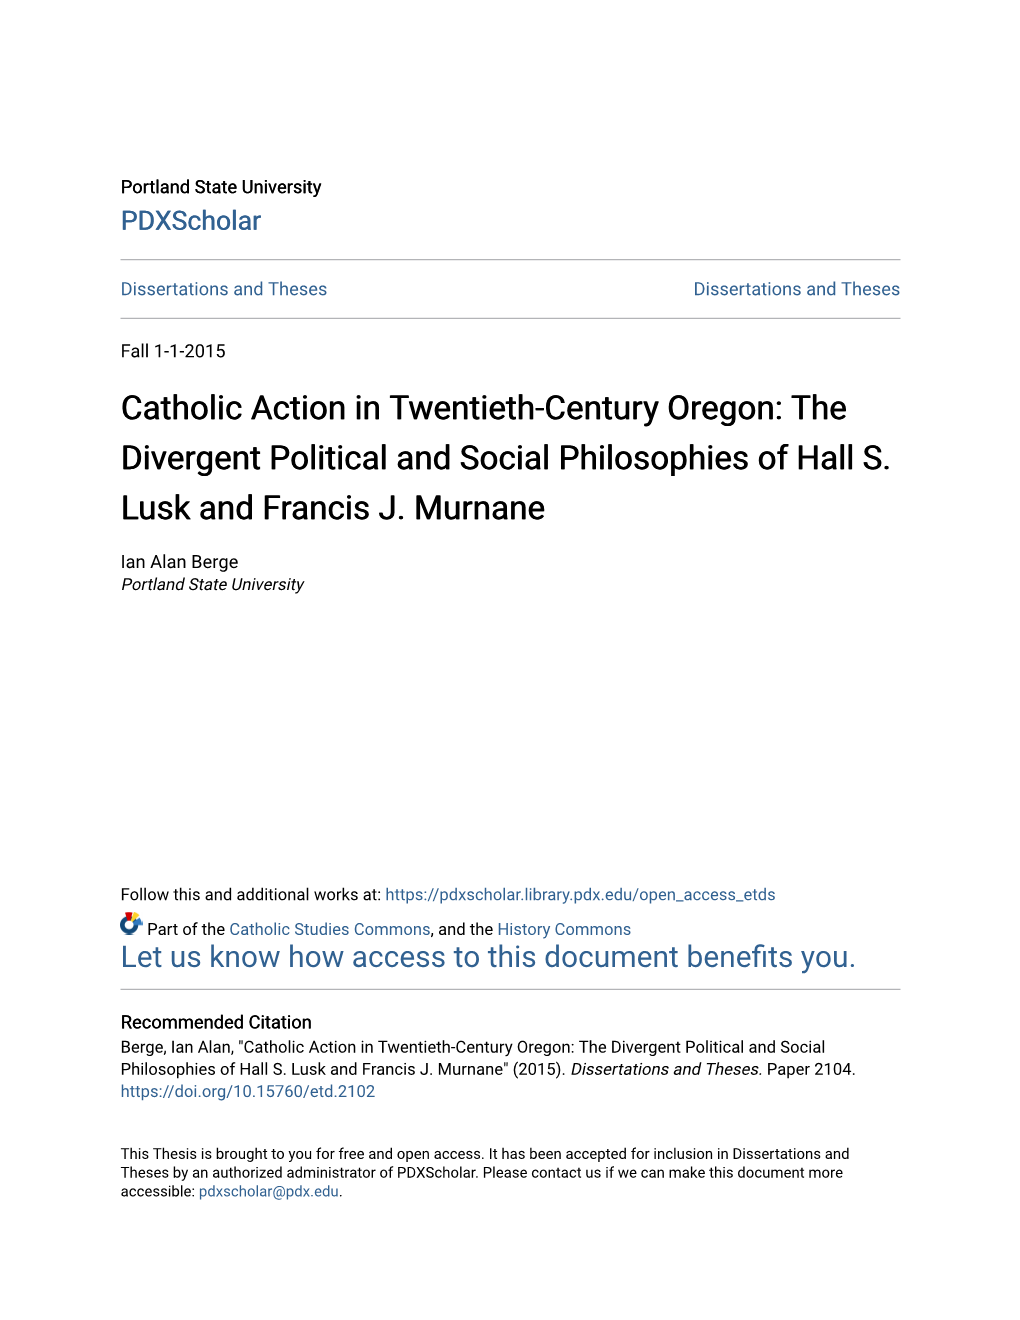 Catholic Action in Twentieth-Century Oregon: the Divergent Political and Social Philosophies of Hall S